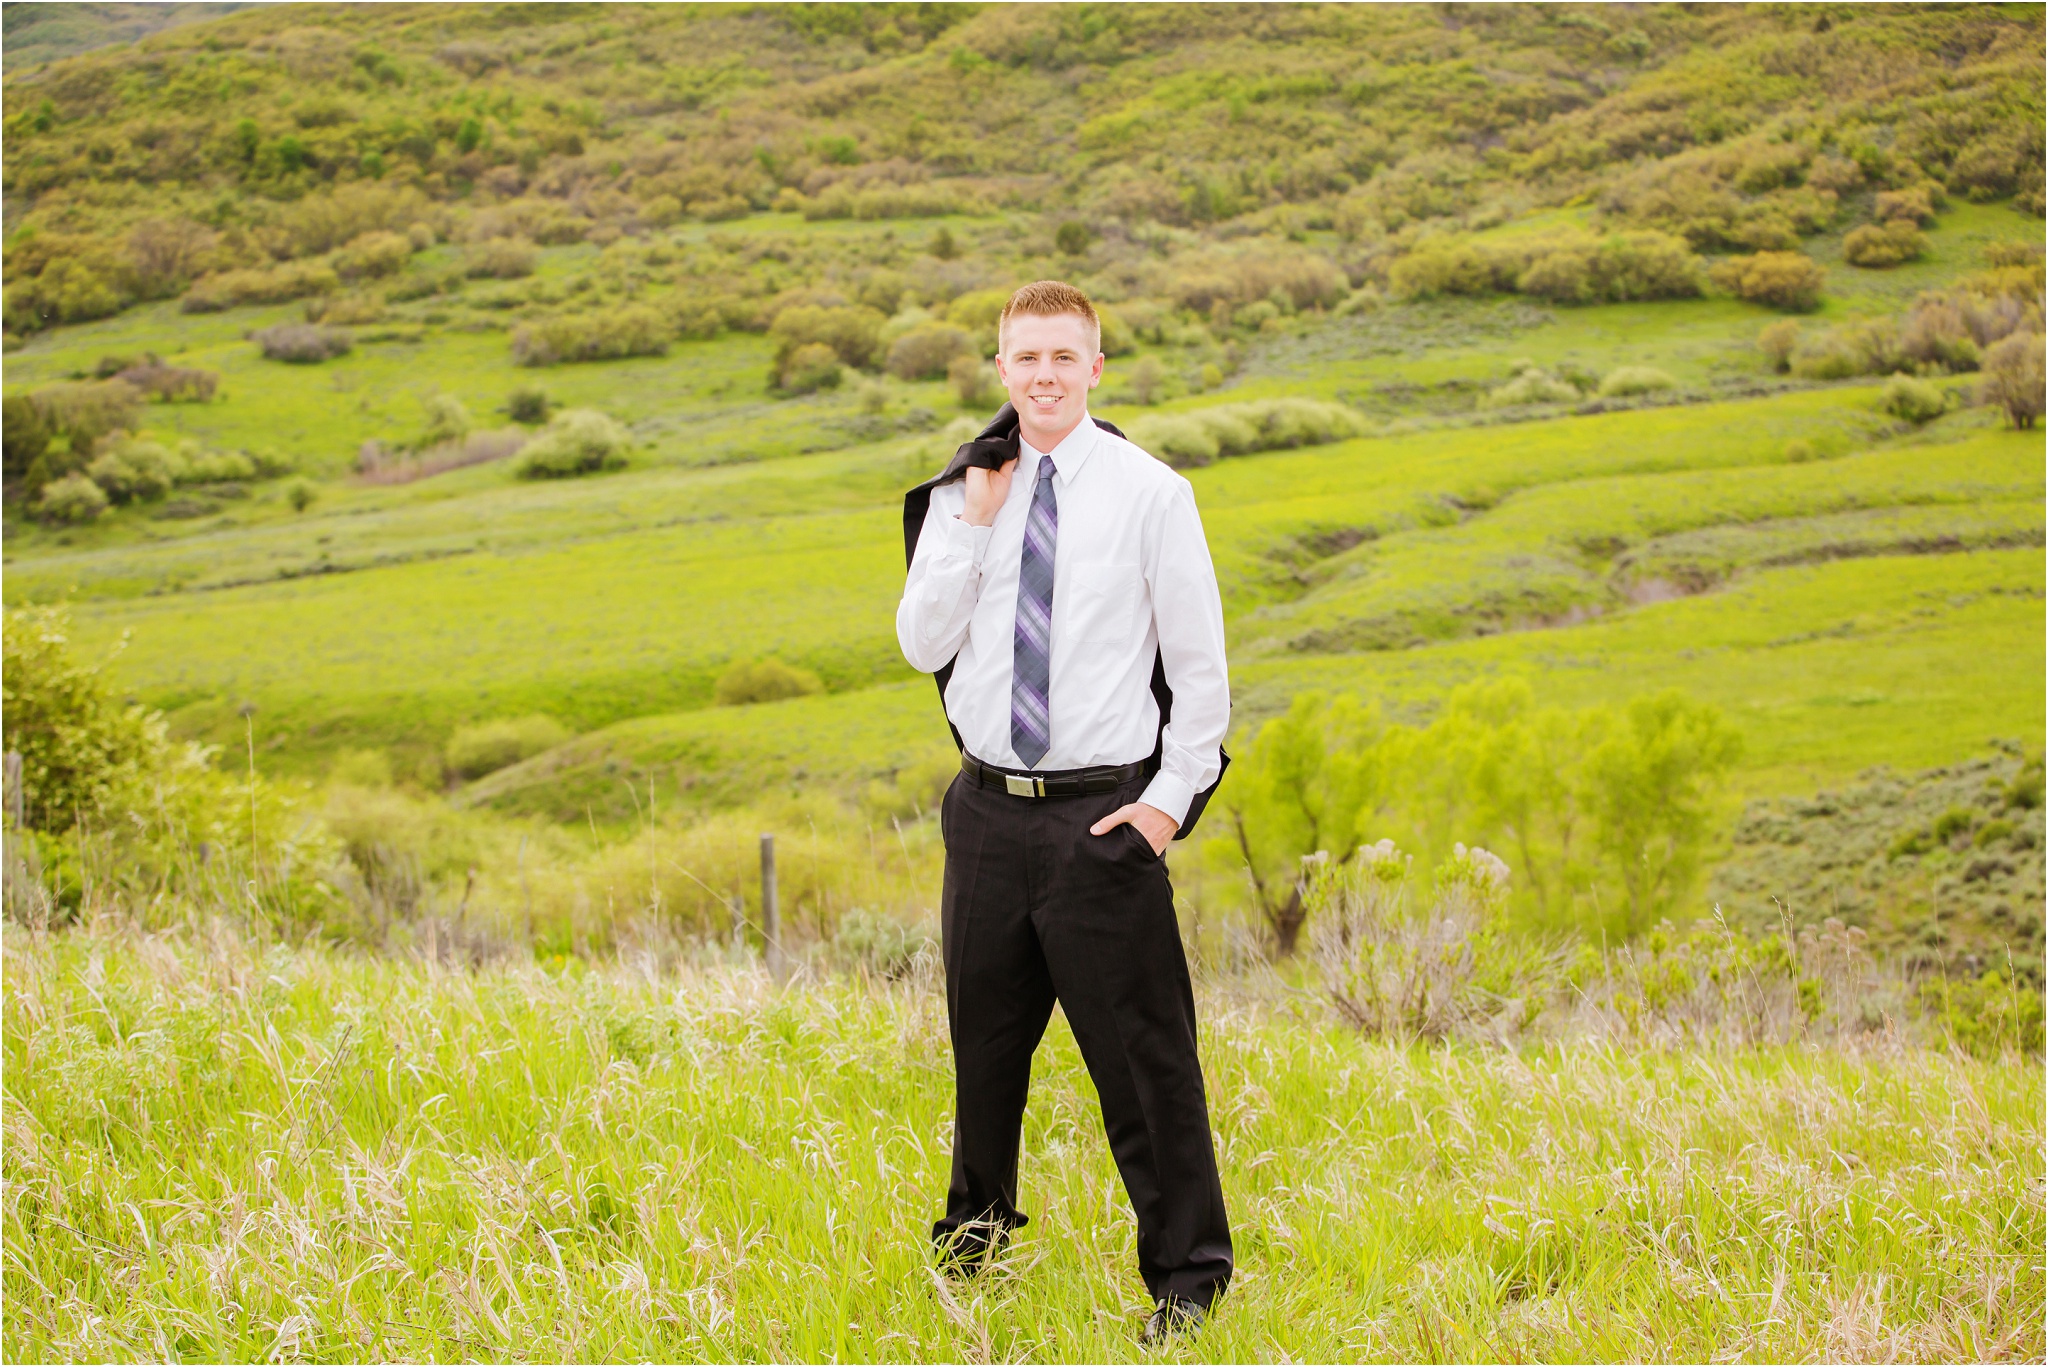 Utah Mountains LDS Missionary Terra Cooper Photography_2224.jpg